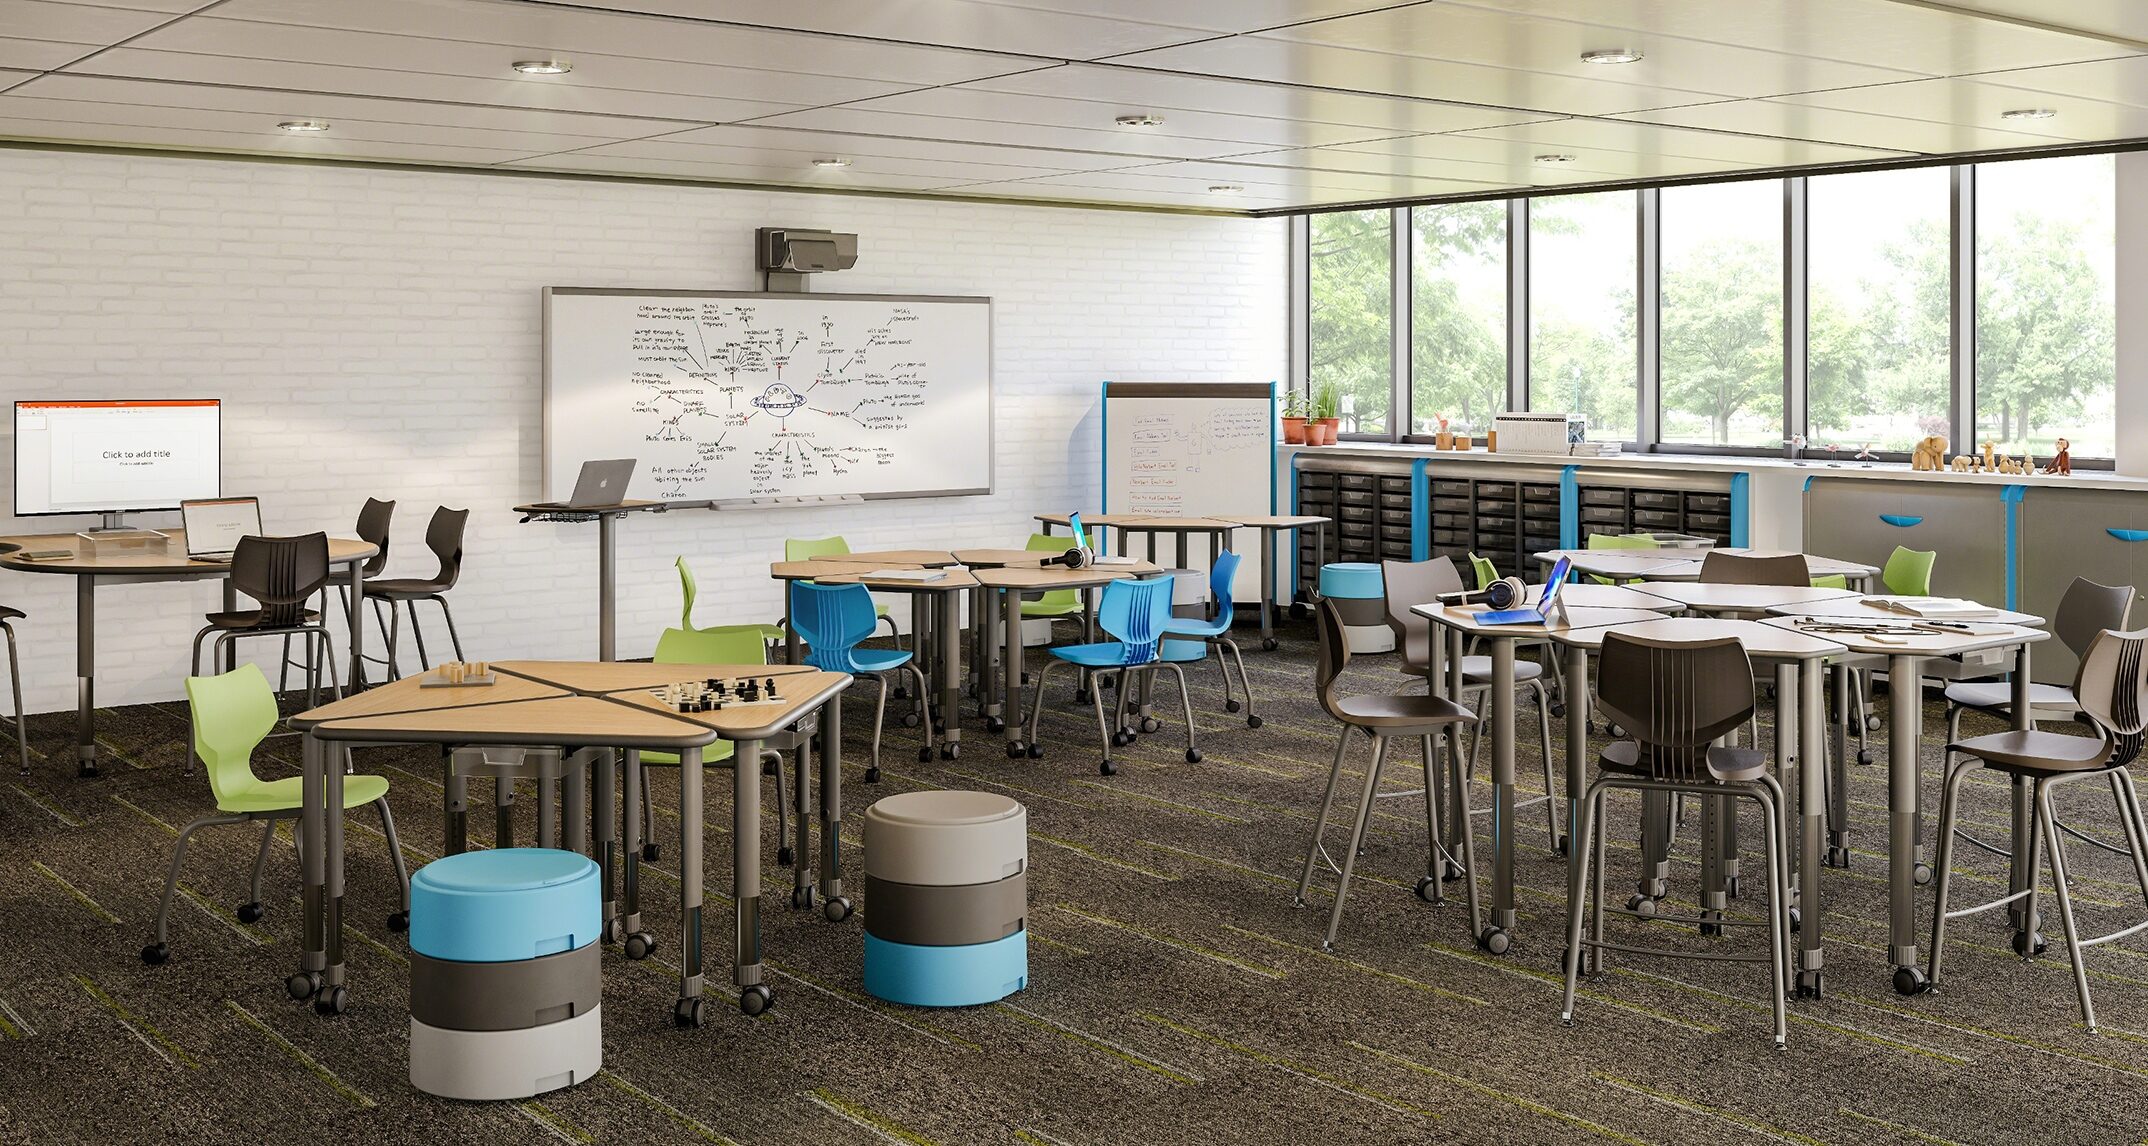 Using moveable desks and flexible seating allows teachers to quickly and easily transition from a whole-class discussion to small-group collaborative learning. Image courtesy of Smith System 